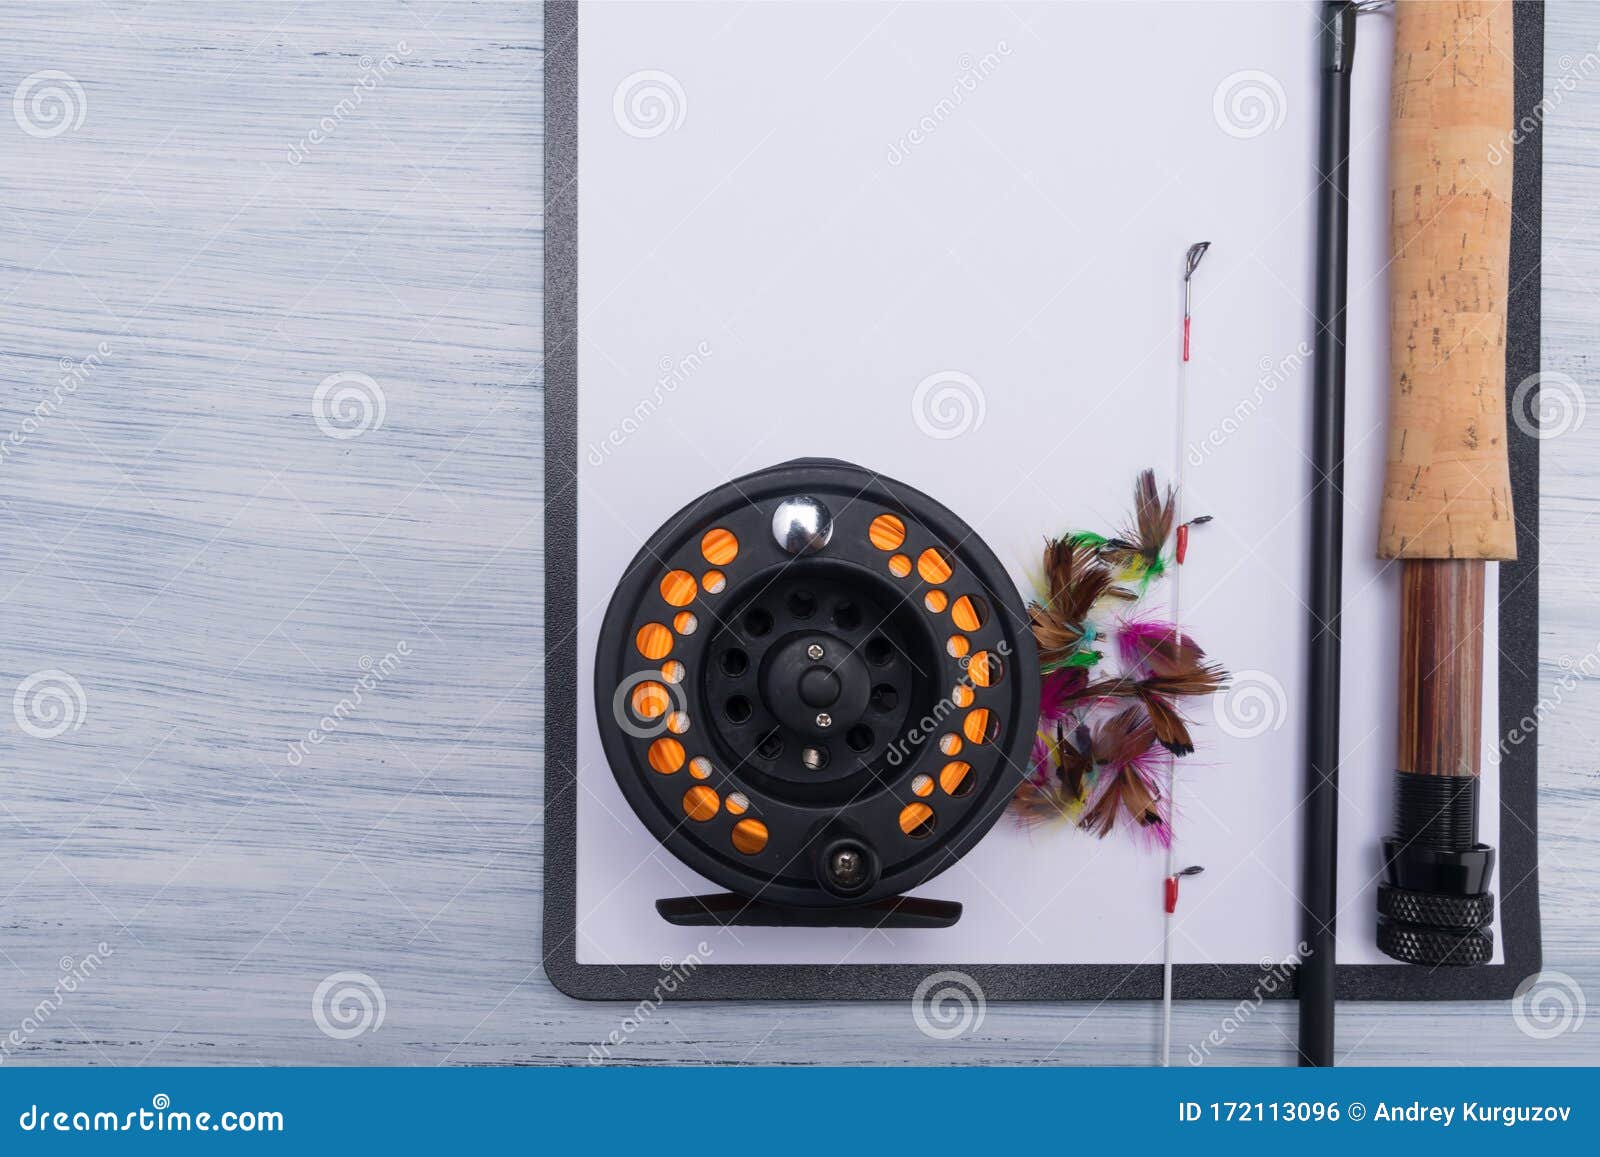 https://thumbs.dreamstime.com/z/wooden-handle-fishing-rod-reel-line-bait-hook-sheet-paper-light-background-place-writing-close-up-172113096.jpg